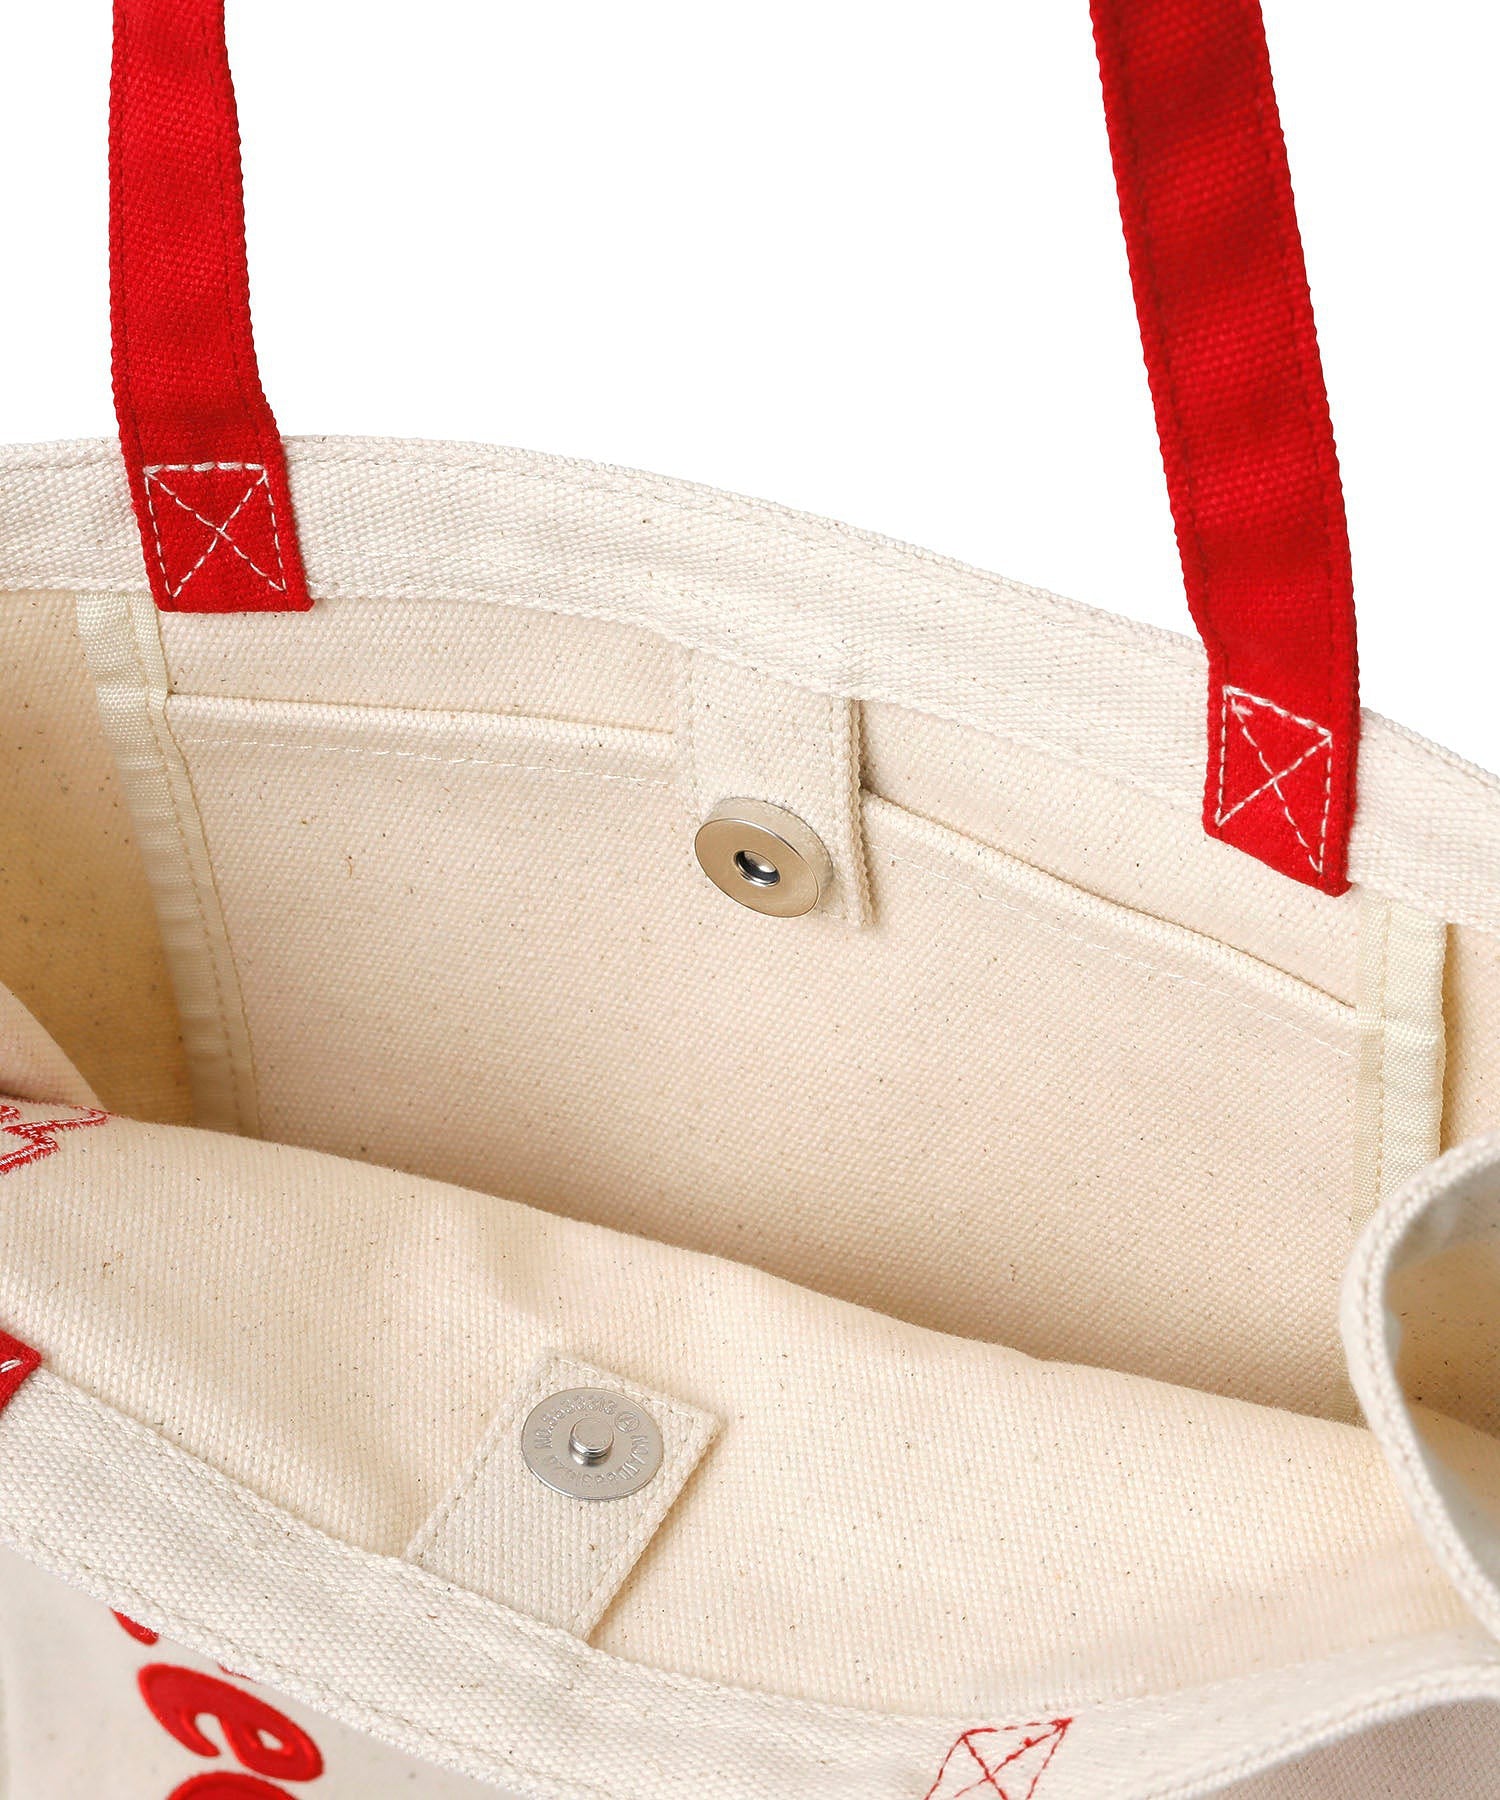 PATCHED COOPER LOGO TOTE MILKFED.